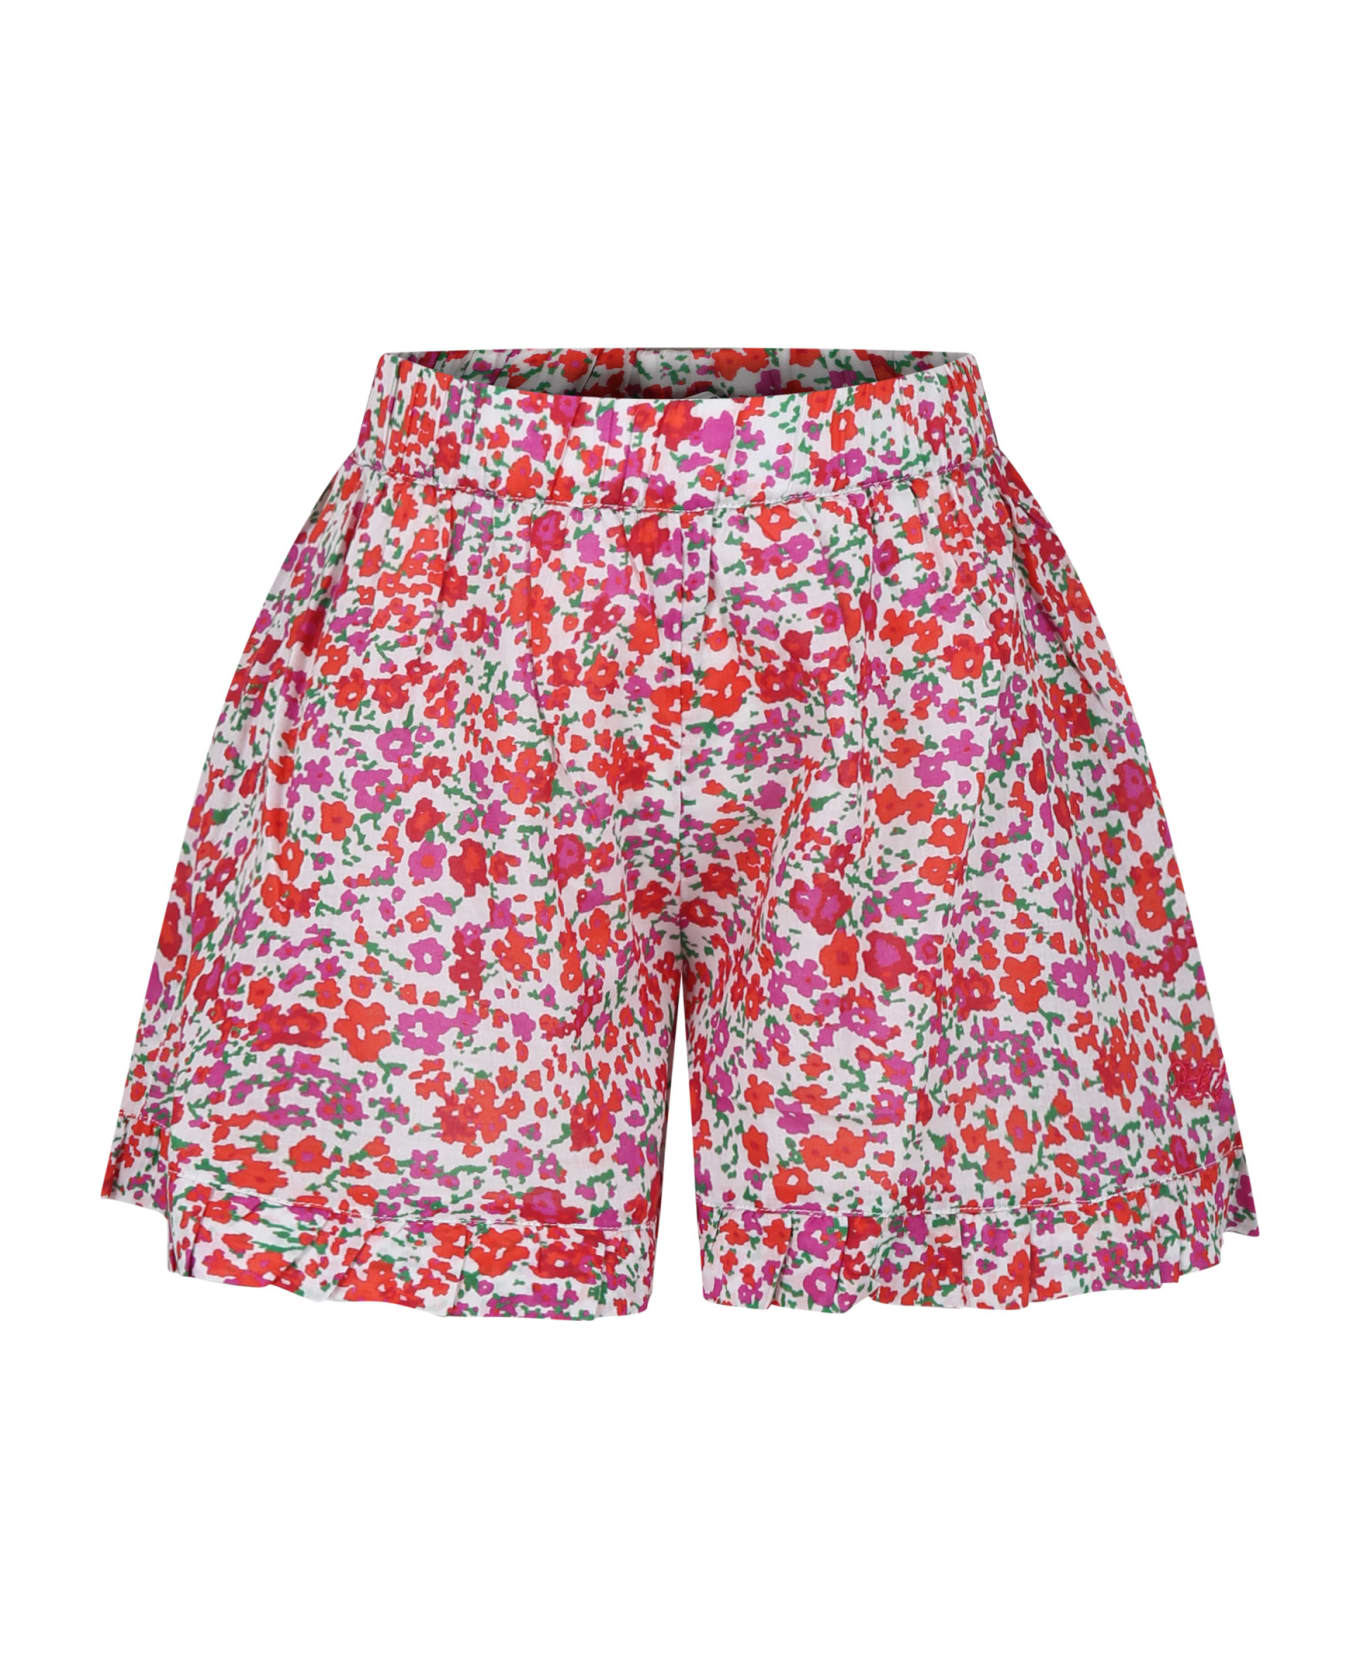 Philosophy di Lorenzo Serafini Kids White Shorts For Girl With Flowers - Multicolor